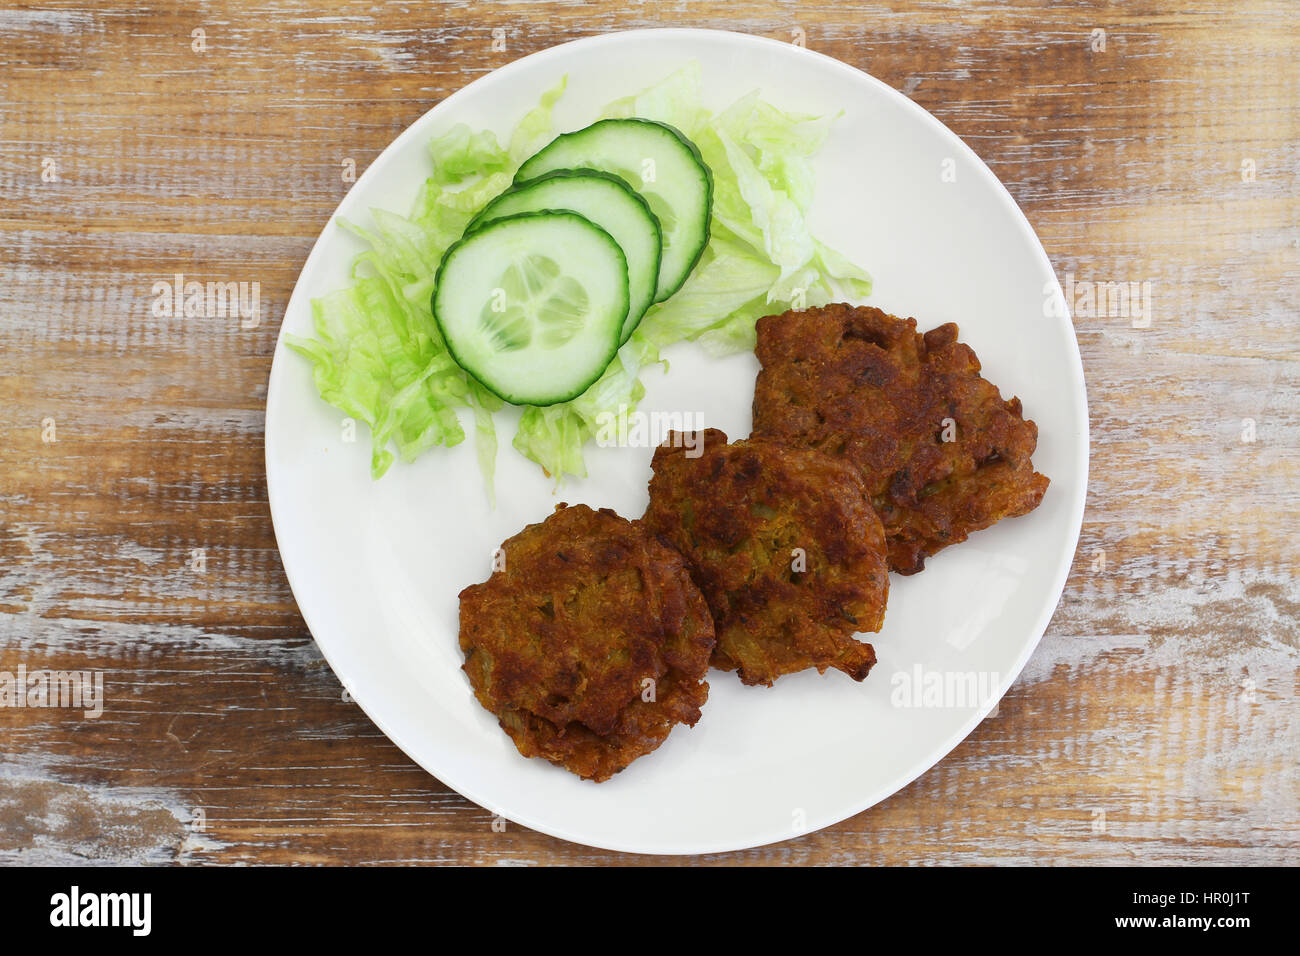 Pakora, classic Indian appetizer with green side salad Stock Photo